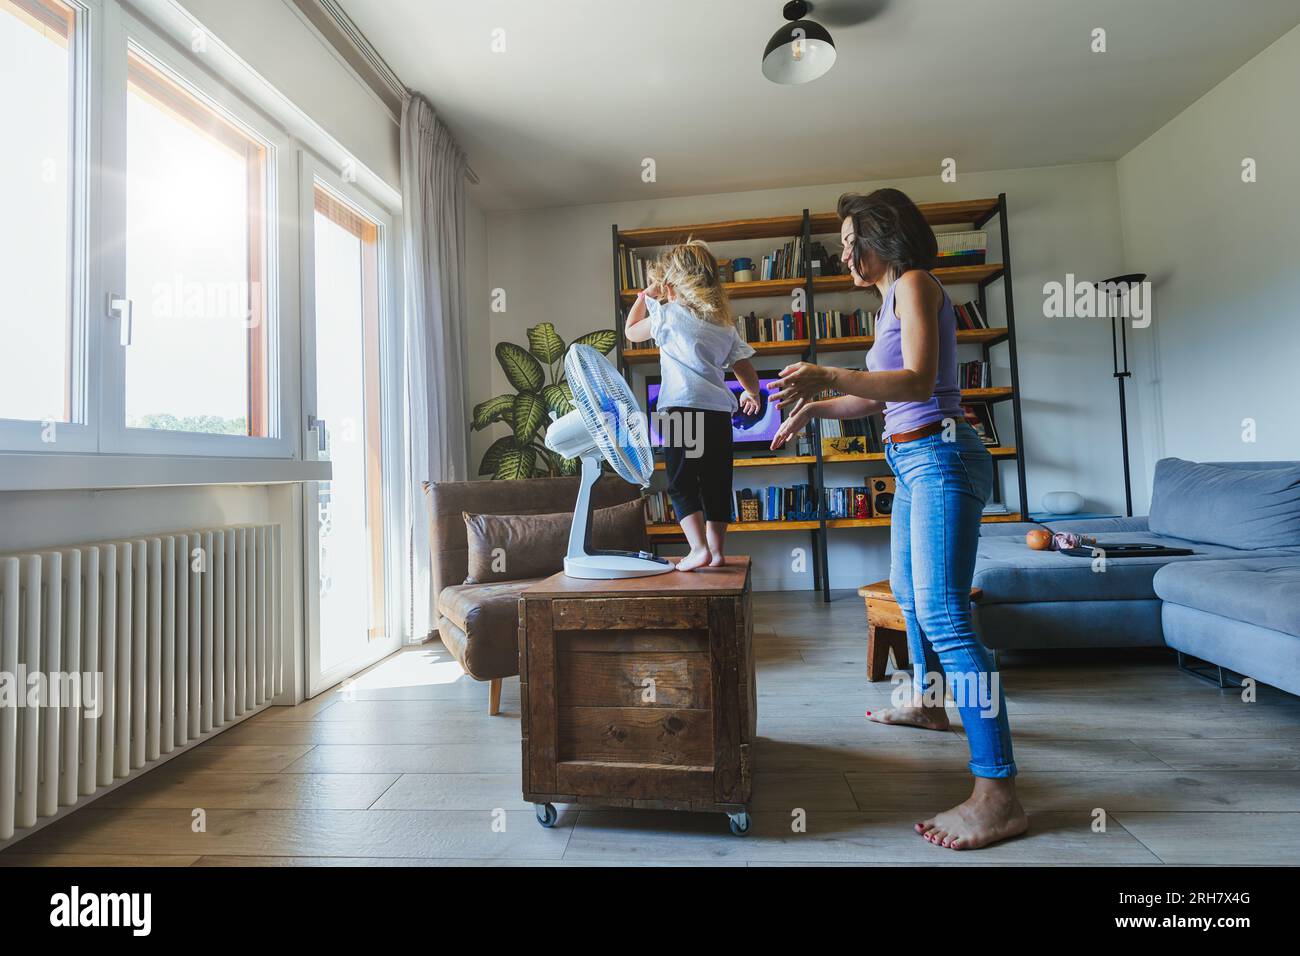 Mom, daughter find joy in fan's coolness, dancing and flying in the living room. Wise fun diverts from heat Stock Photo